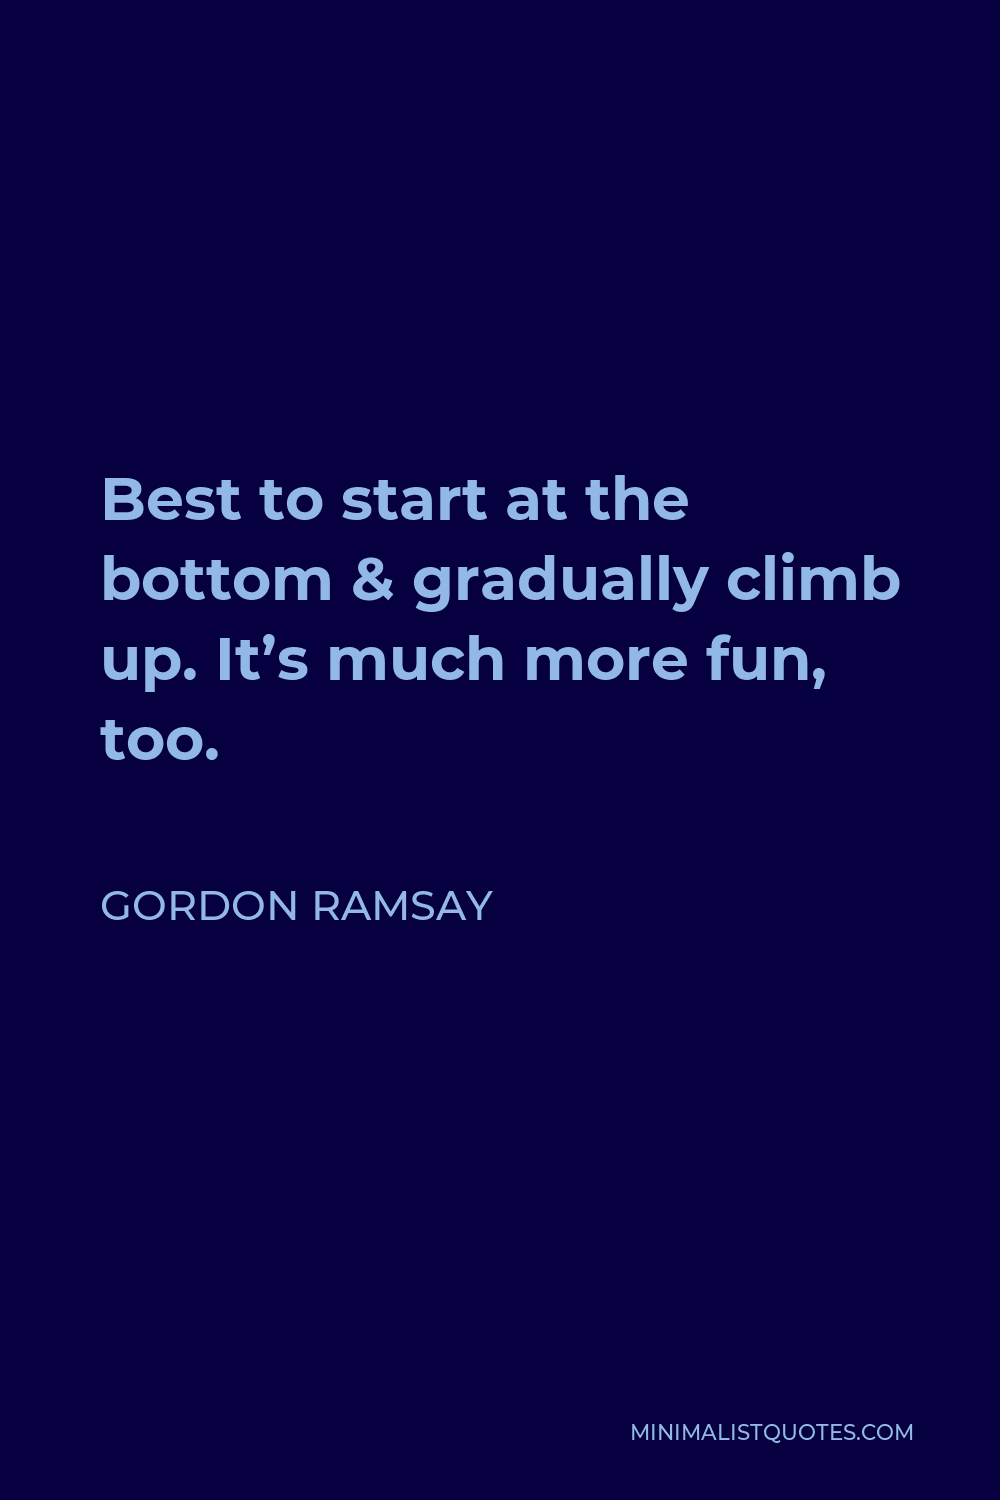 Gordon Ramsay Quote: Best to start at the bottom & gradually climb up. It's  much more fun, too.